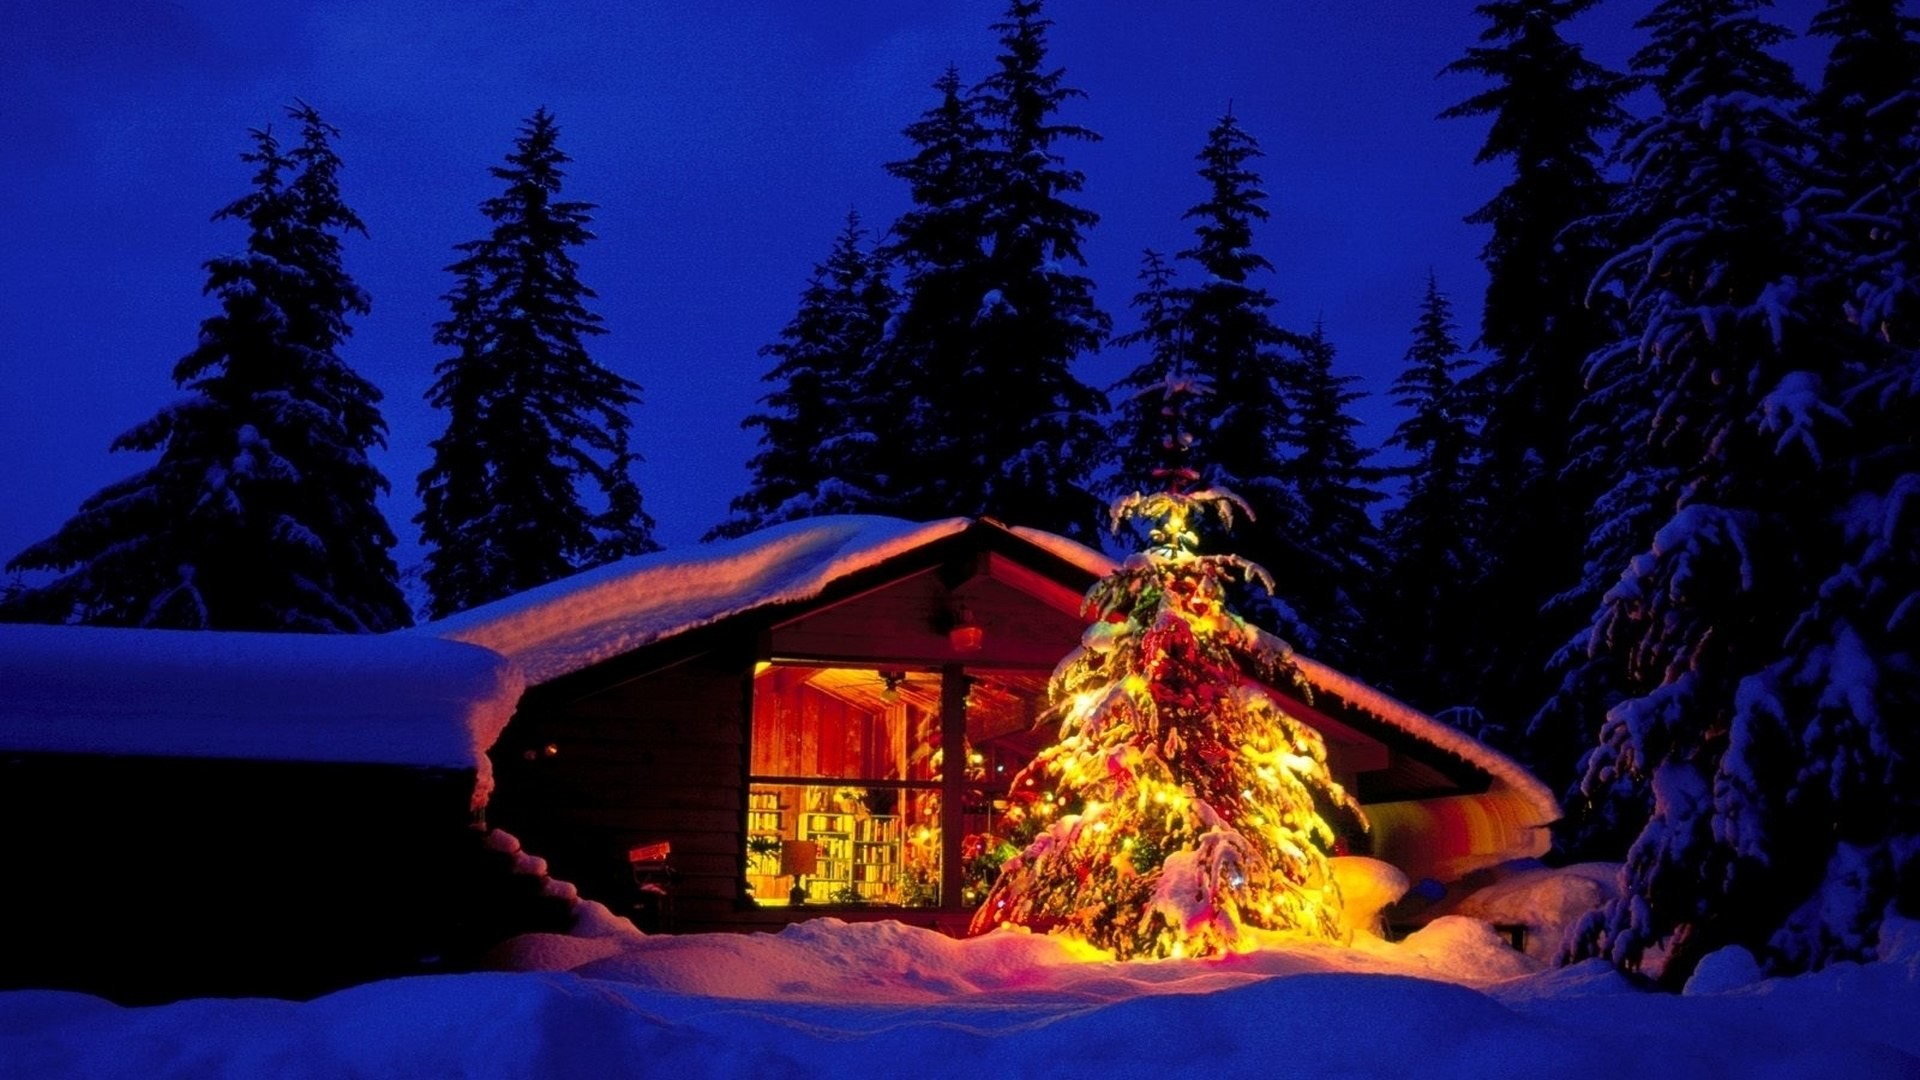 1920x1080 Find this Pin and more on Winter-Christmas Wallpaper by debbiesq333.